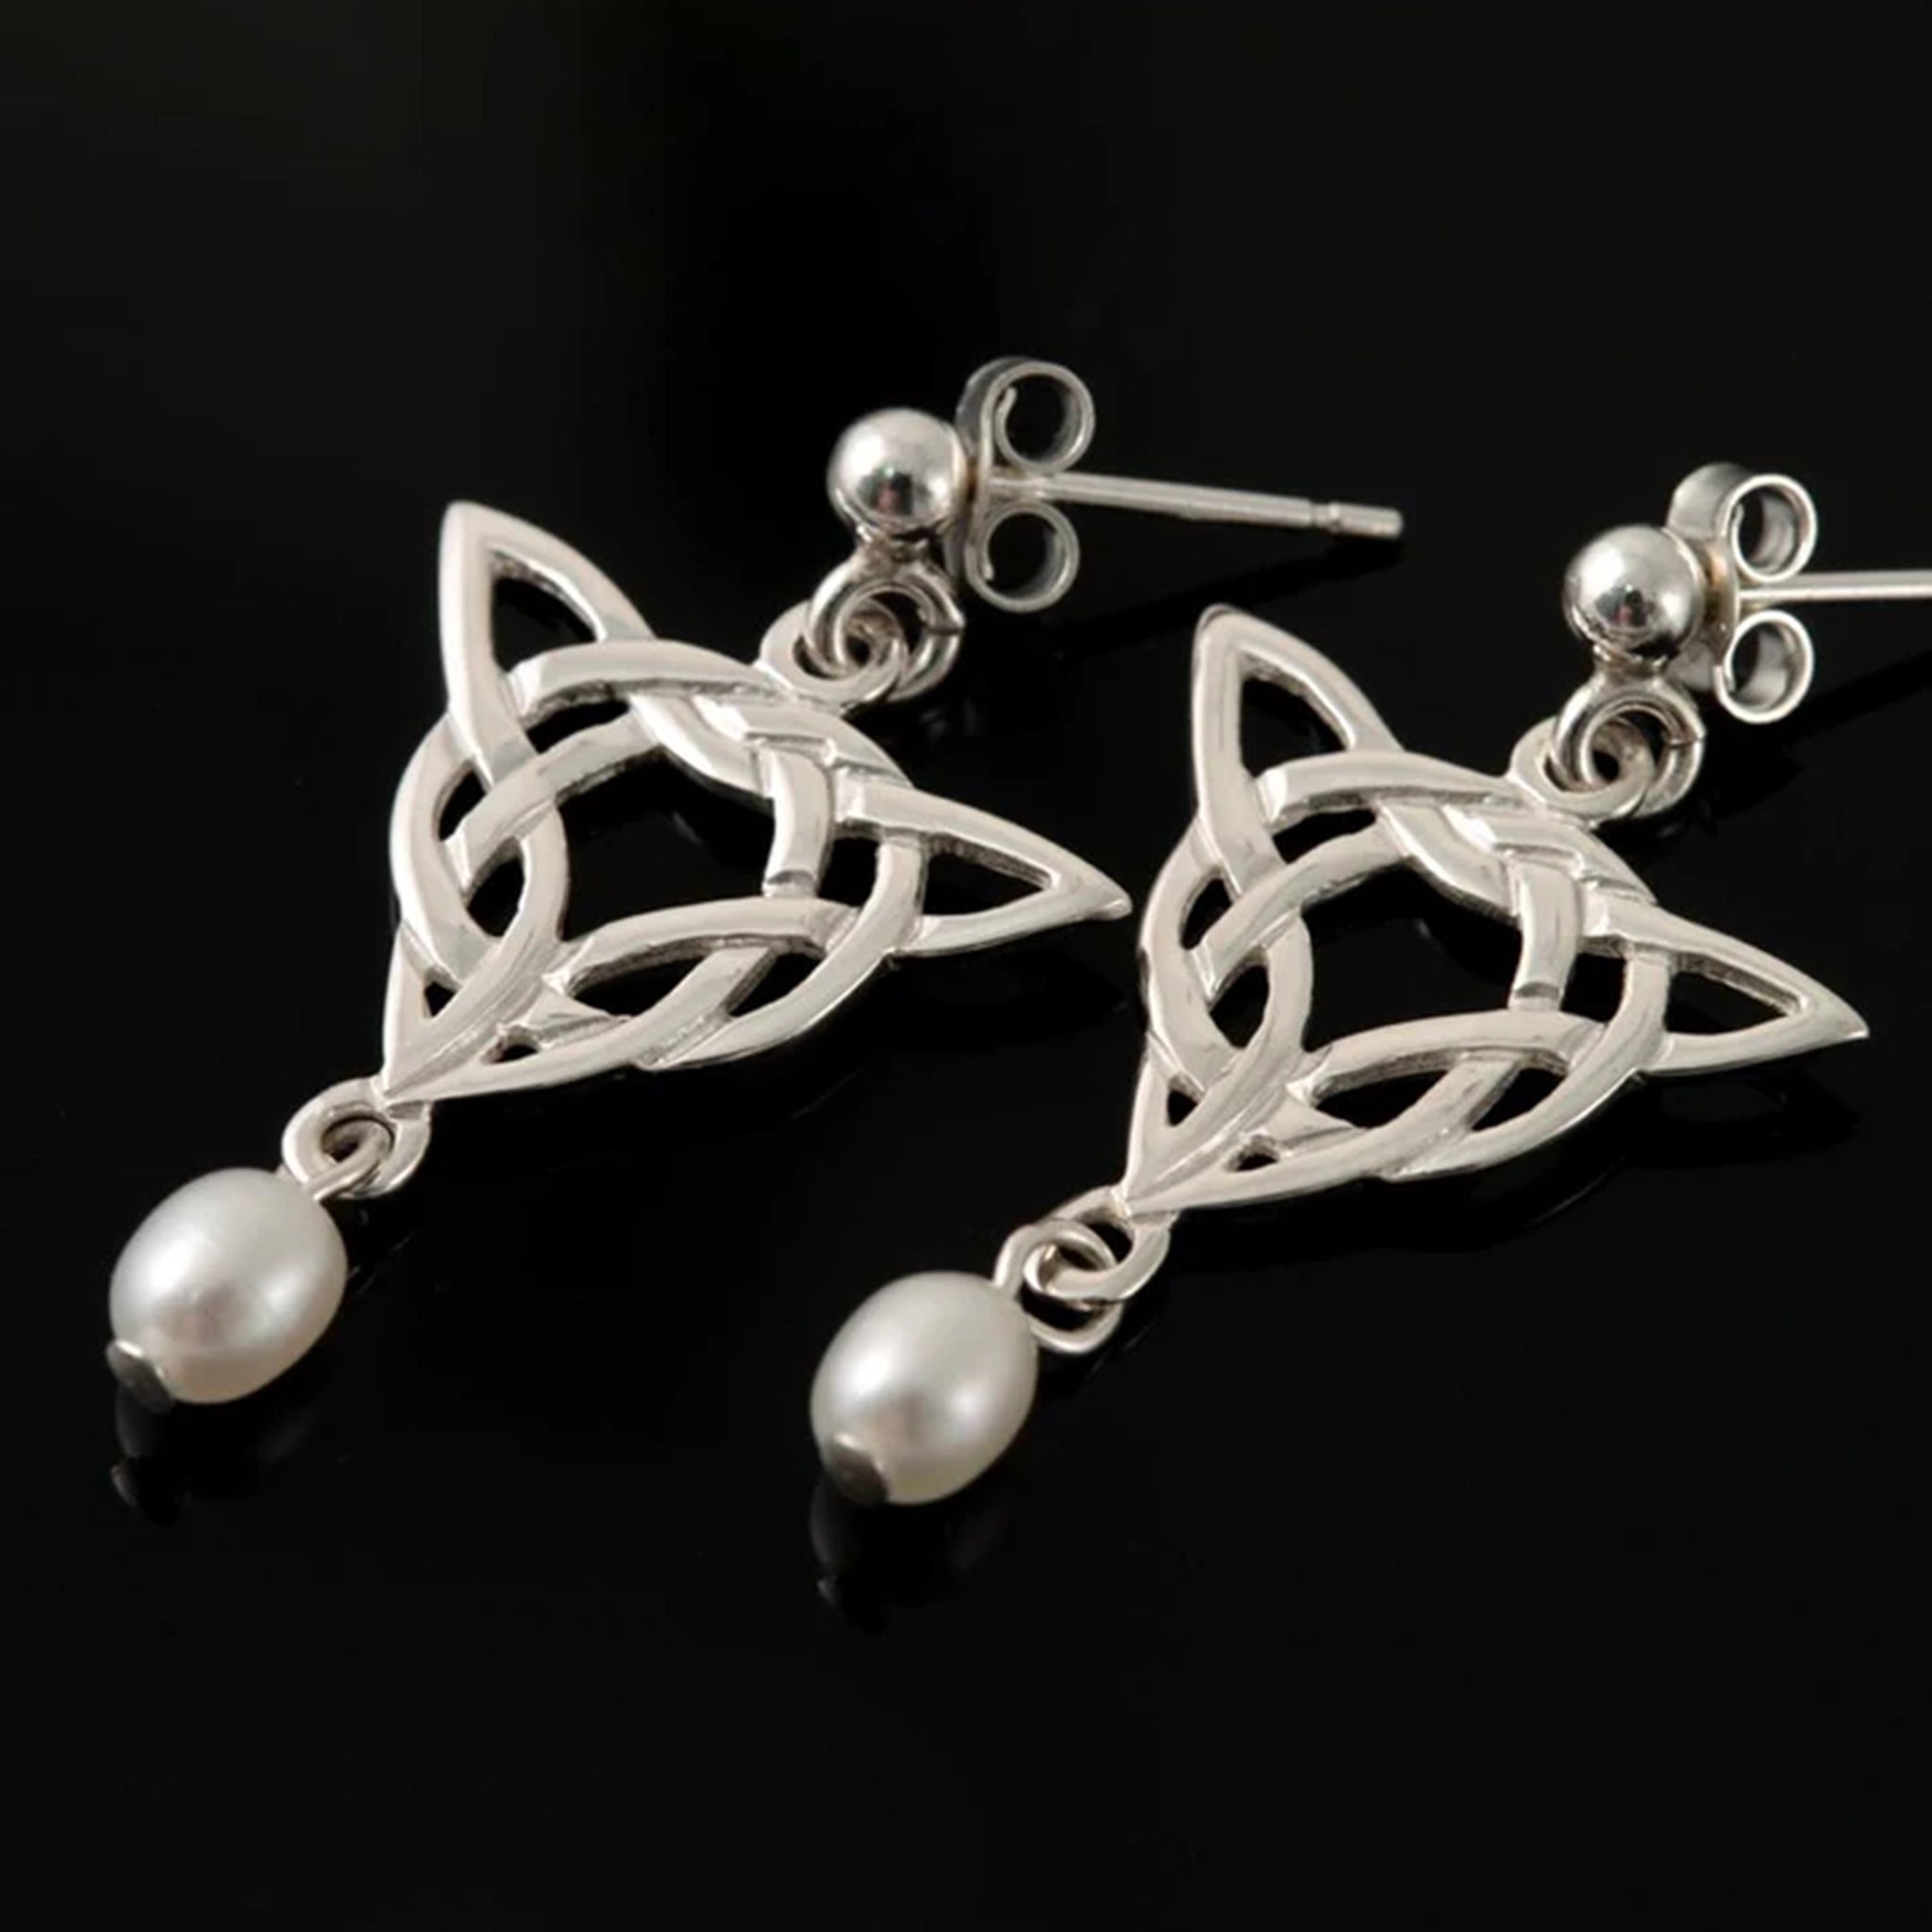 A pair of silver trinity knot style drop earrings with teardrop shaped dangling white pearls